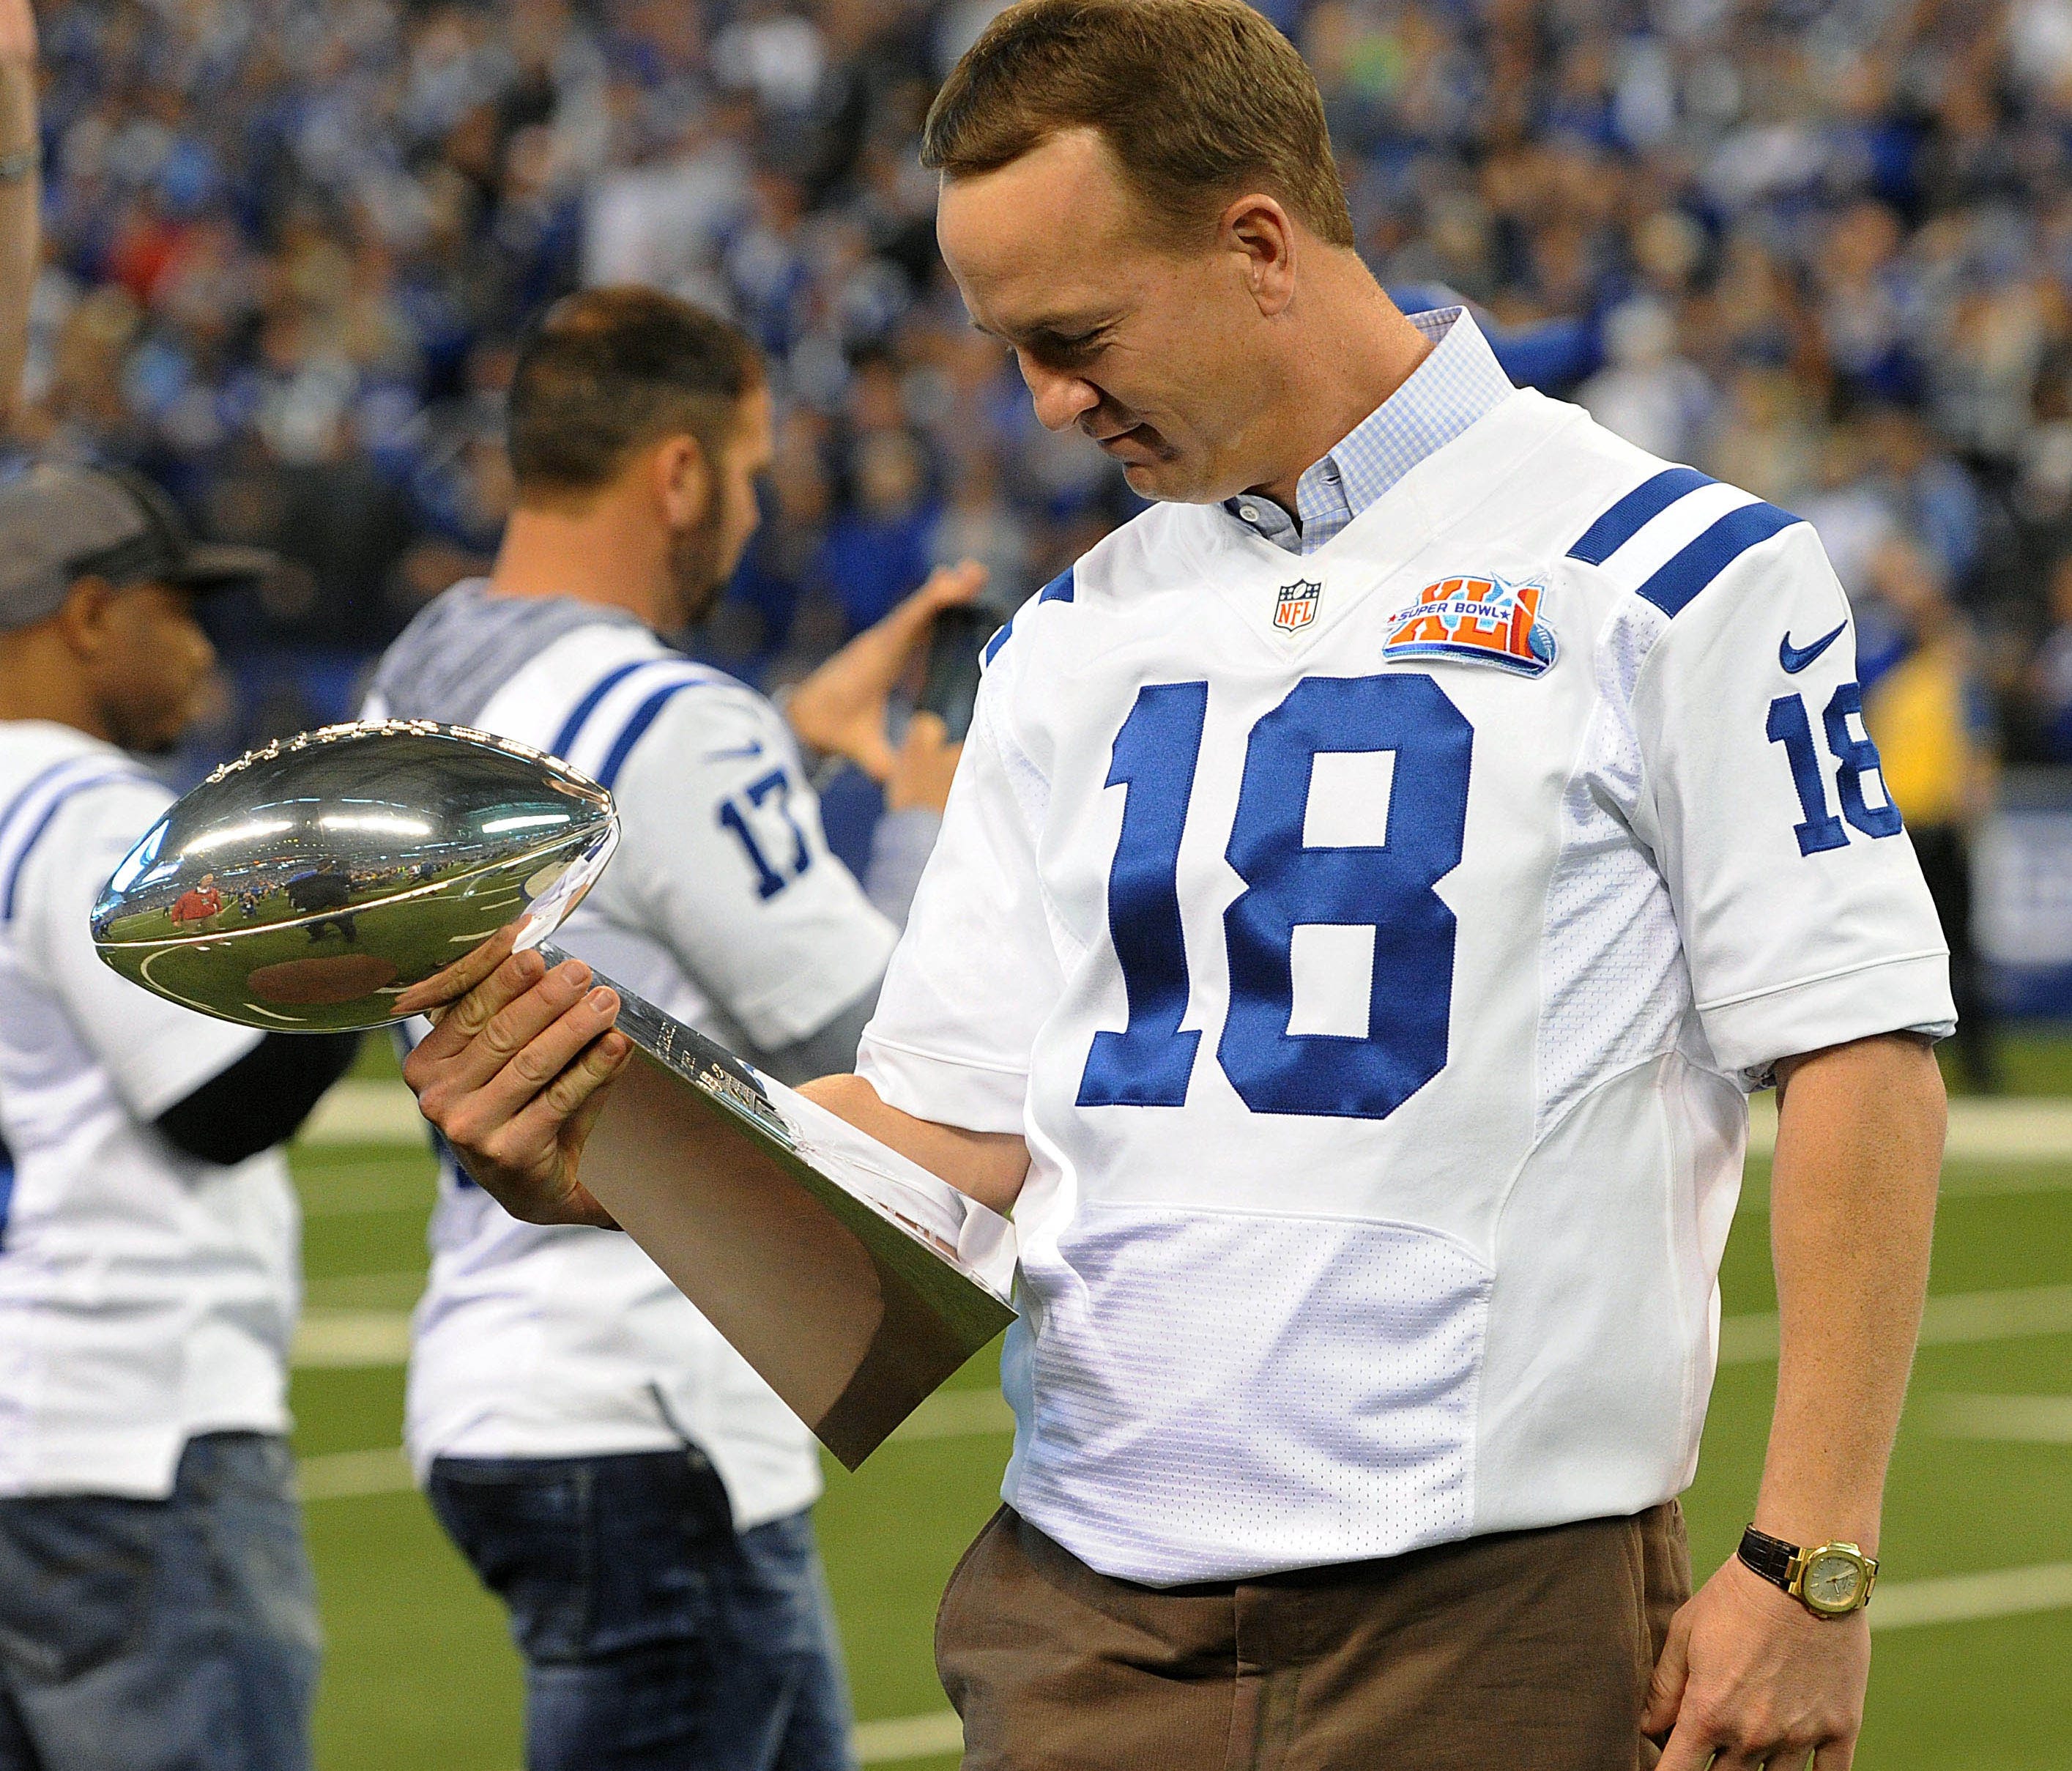 Indianapolis Colts former quarterback Peyton Manning holds the Lombardi Trophy at halftime of a game against the Tennessee Titans to honor the 10th anniversary of the 2006 Super Bowl championship team at Lucas Oil Stadium.